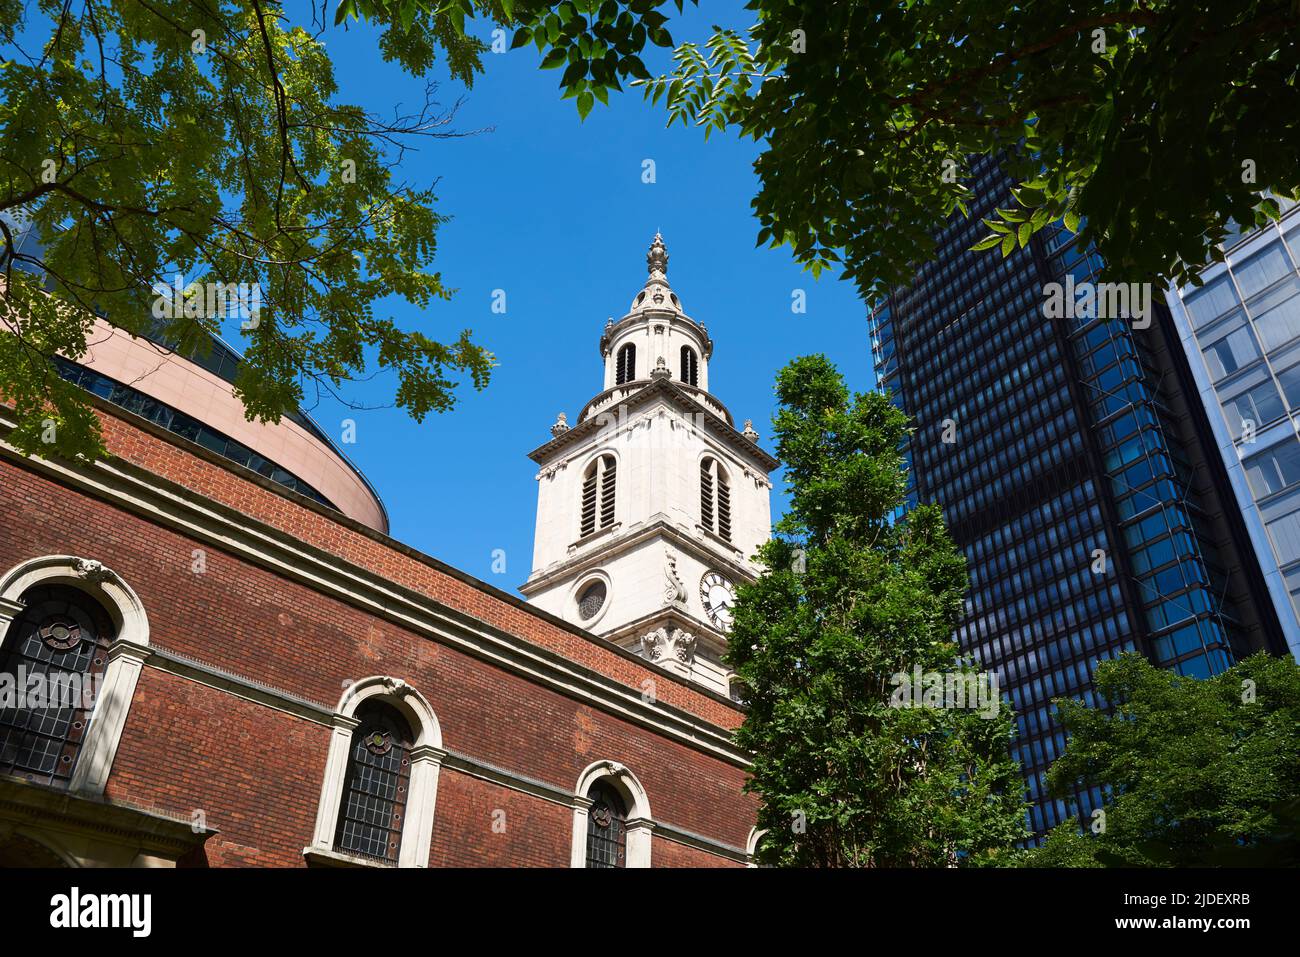 St Botolph-without-Bishopsgate church in the City of London, South East England Stock Photo